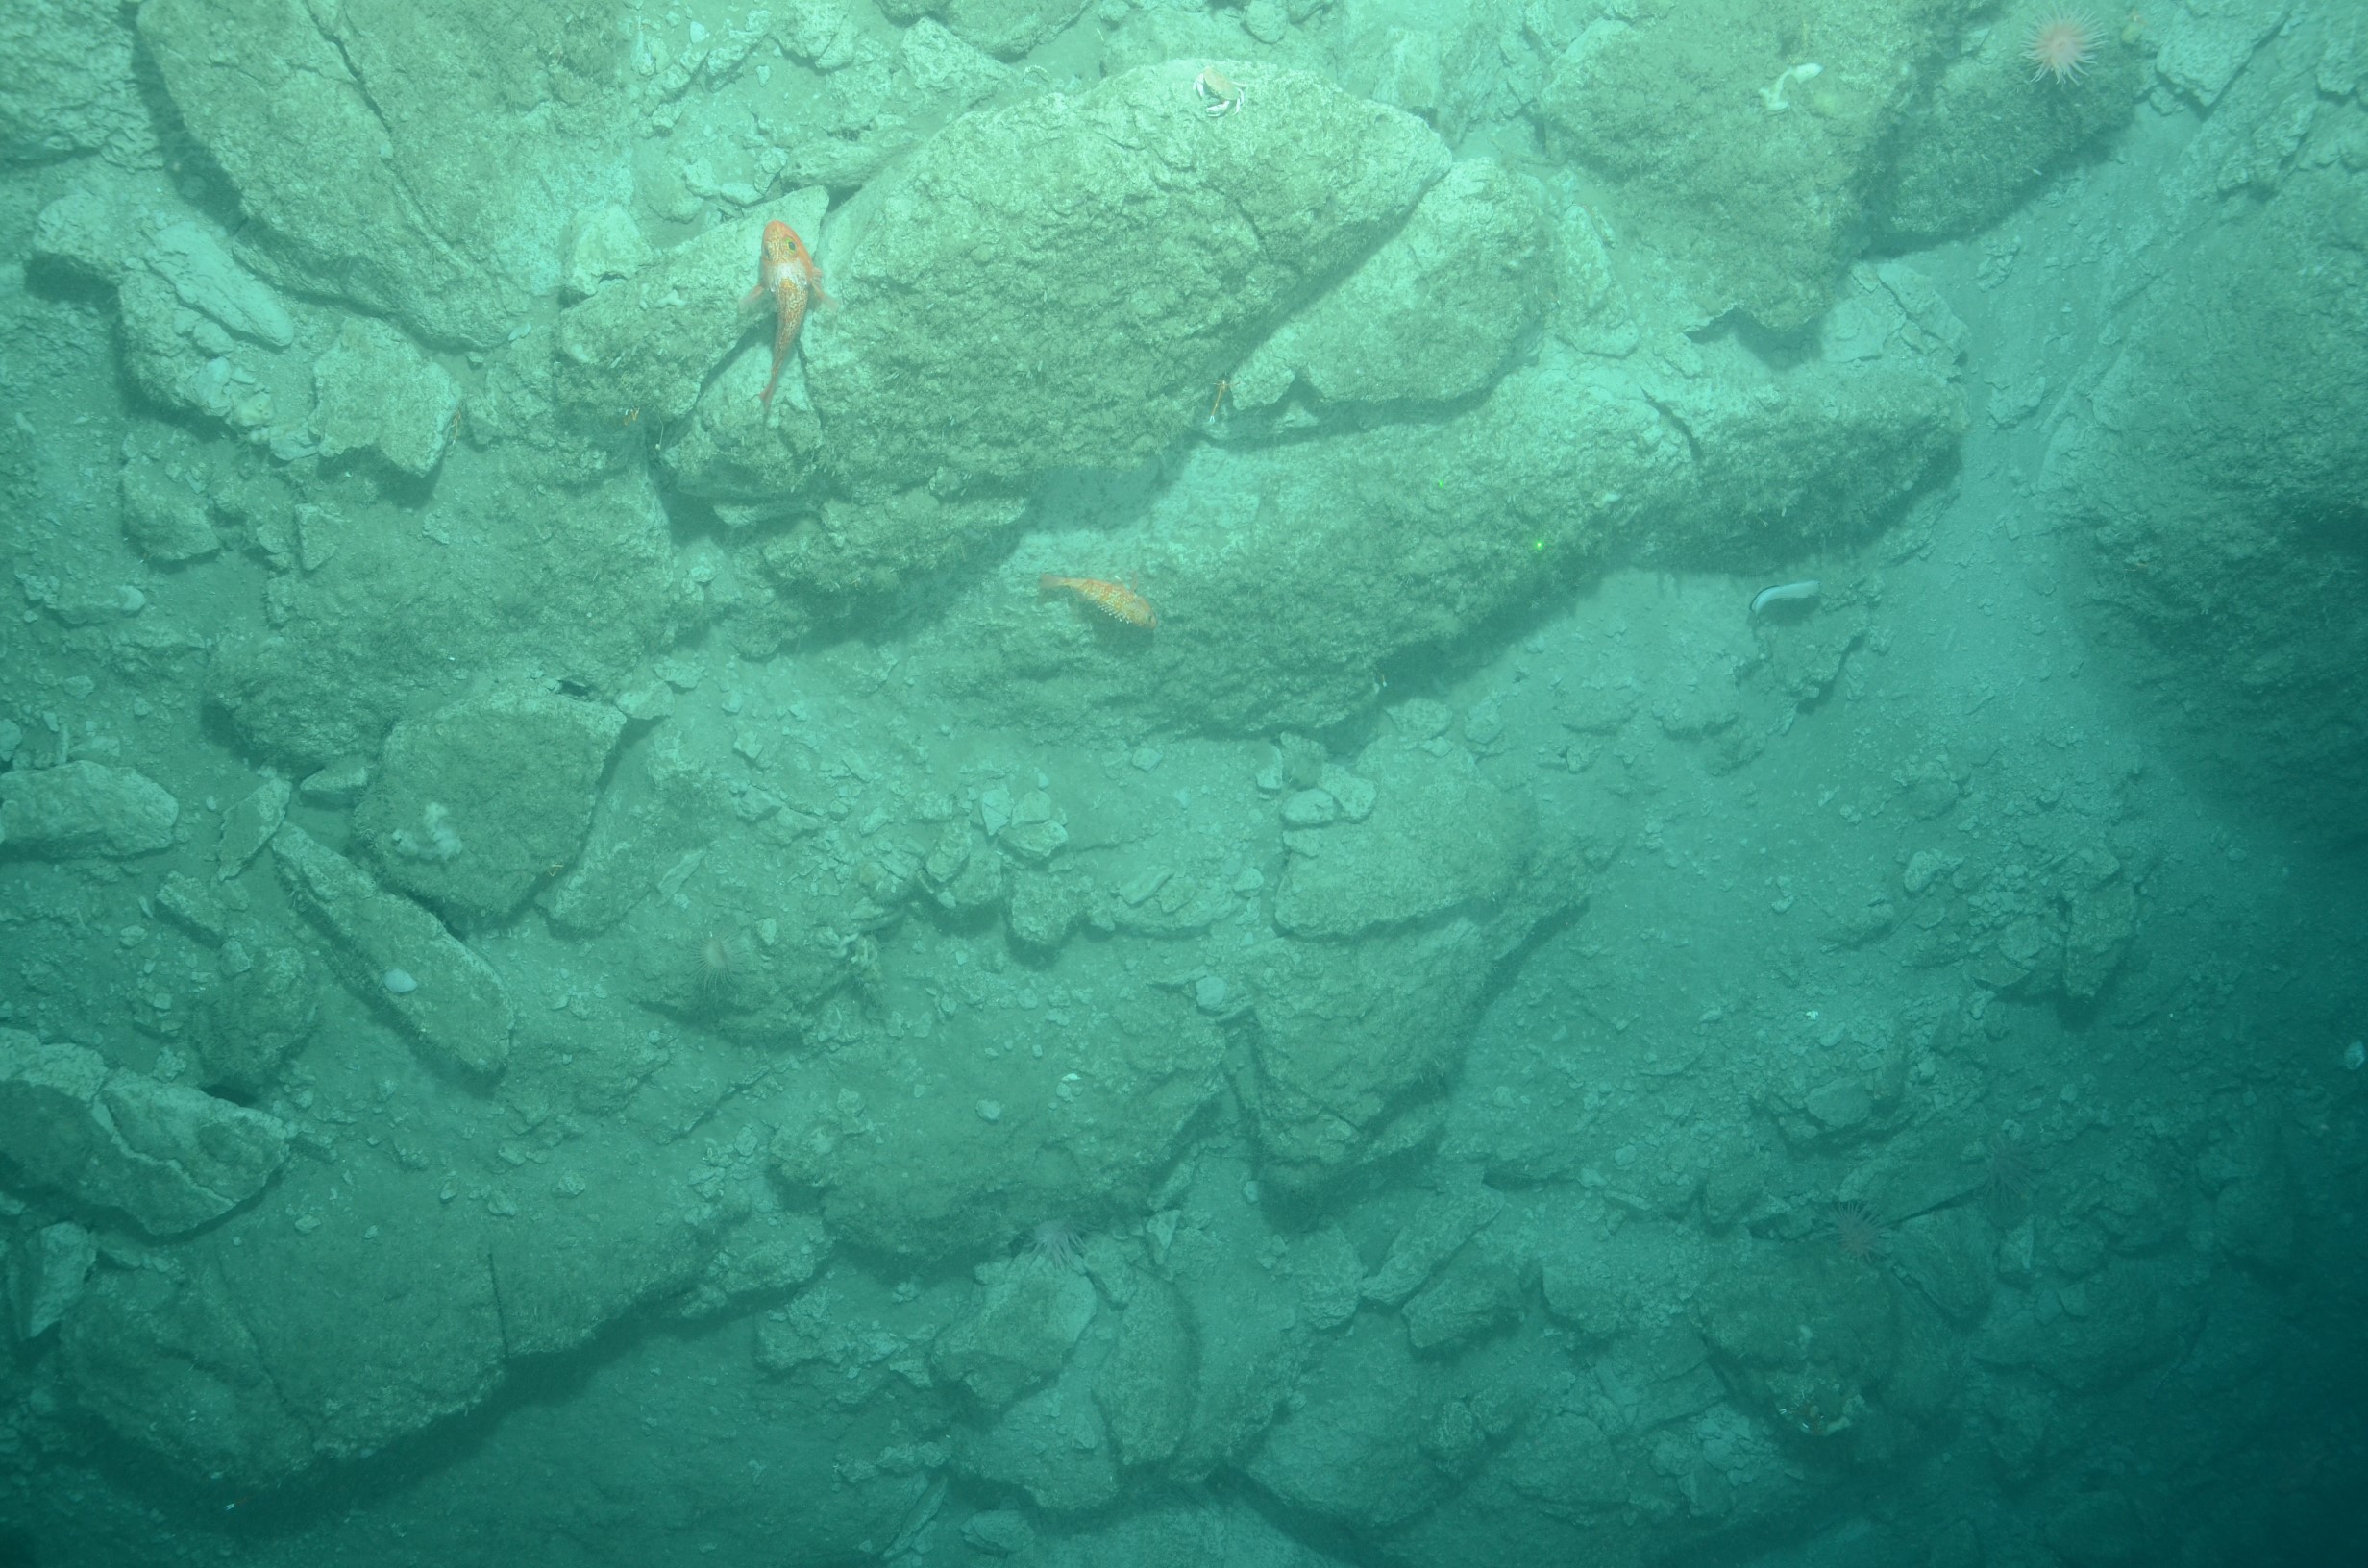 Red 'rockfish' along the hard bottom at 400 meters in Wilmington Canyon